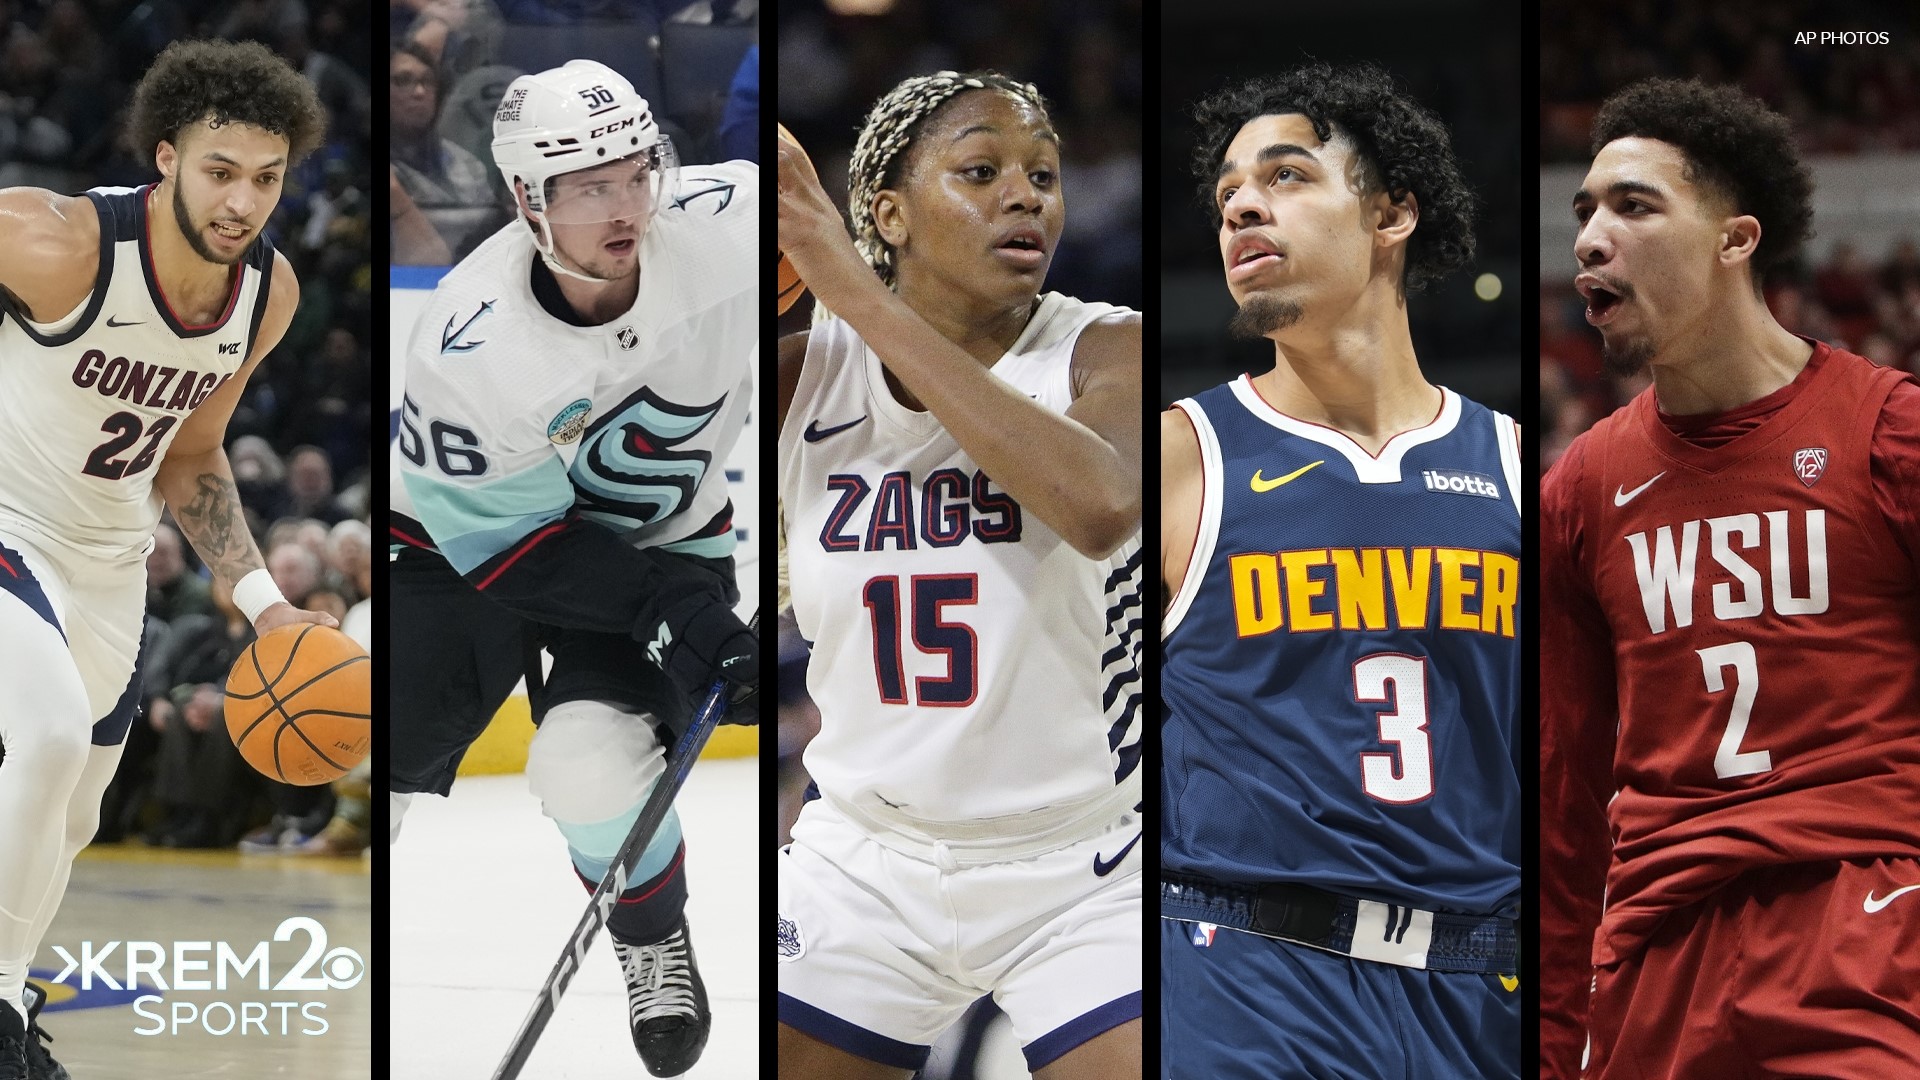 From college sports to the pros, the Inland Northwest is home to a lot of athletes. KREM 2 Sports sits down to talk with the sports stars of today and in the future.